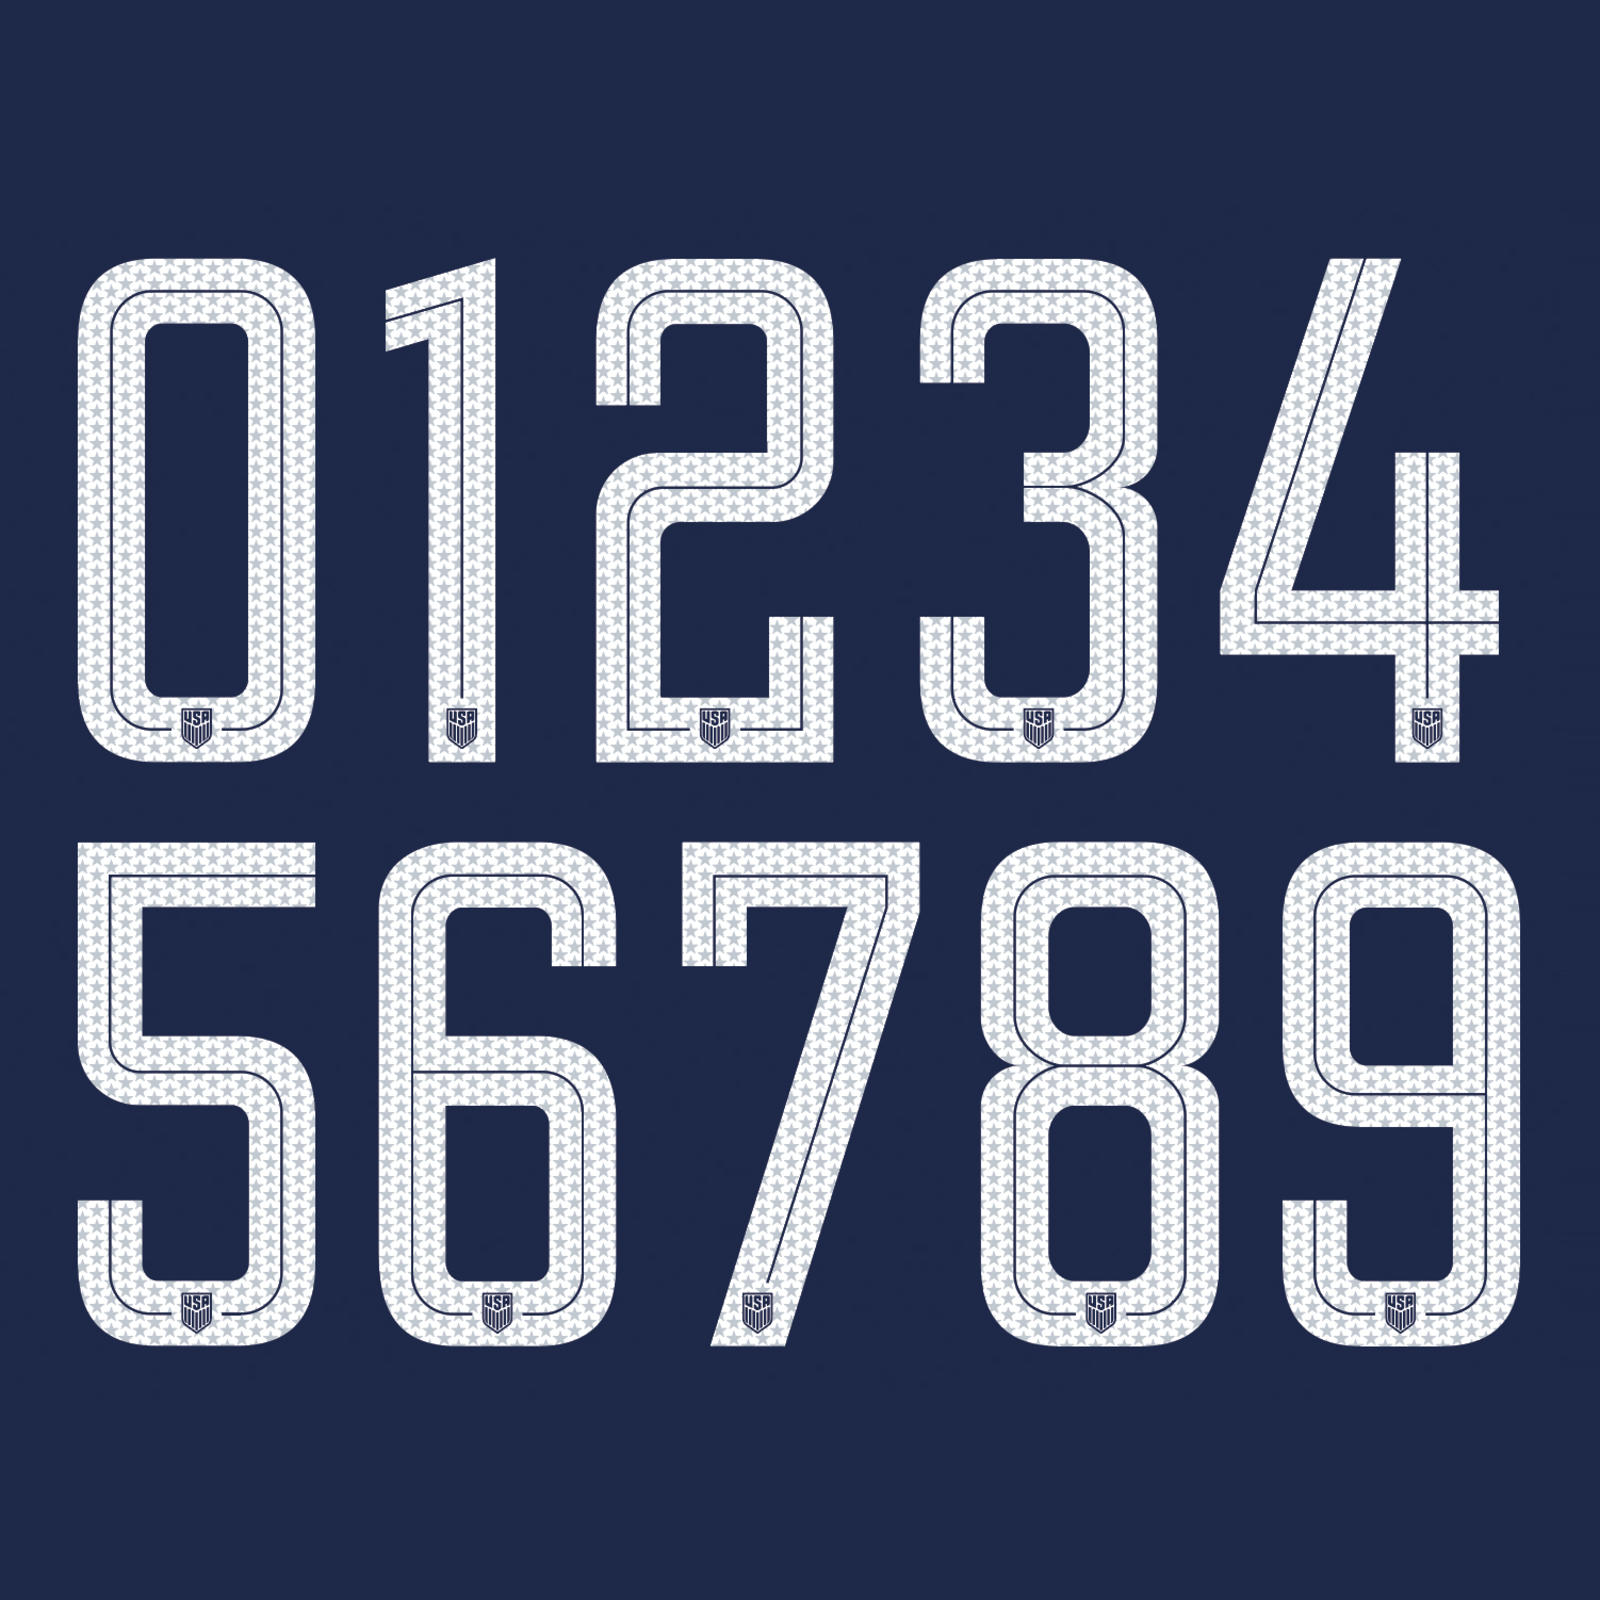 Font used for sports jerseys